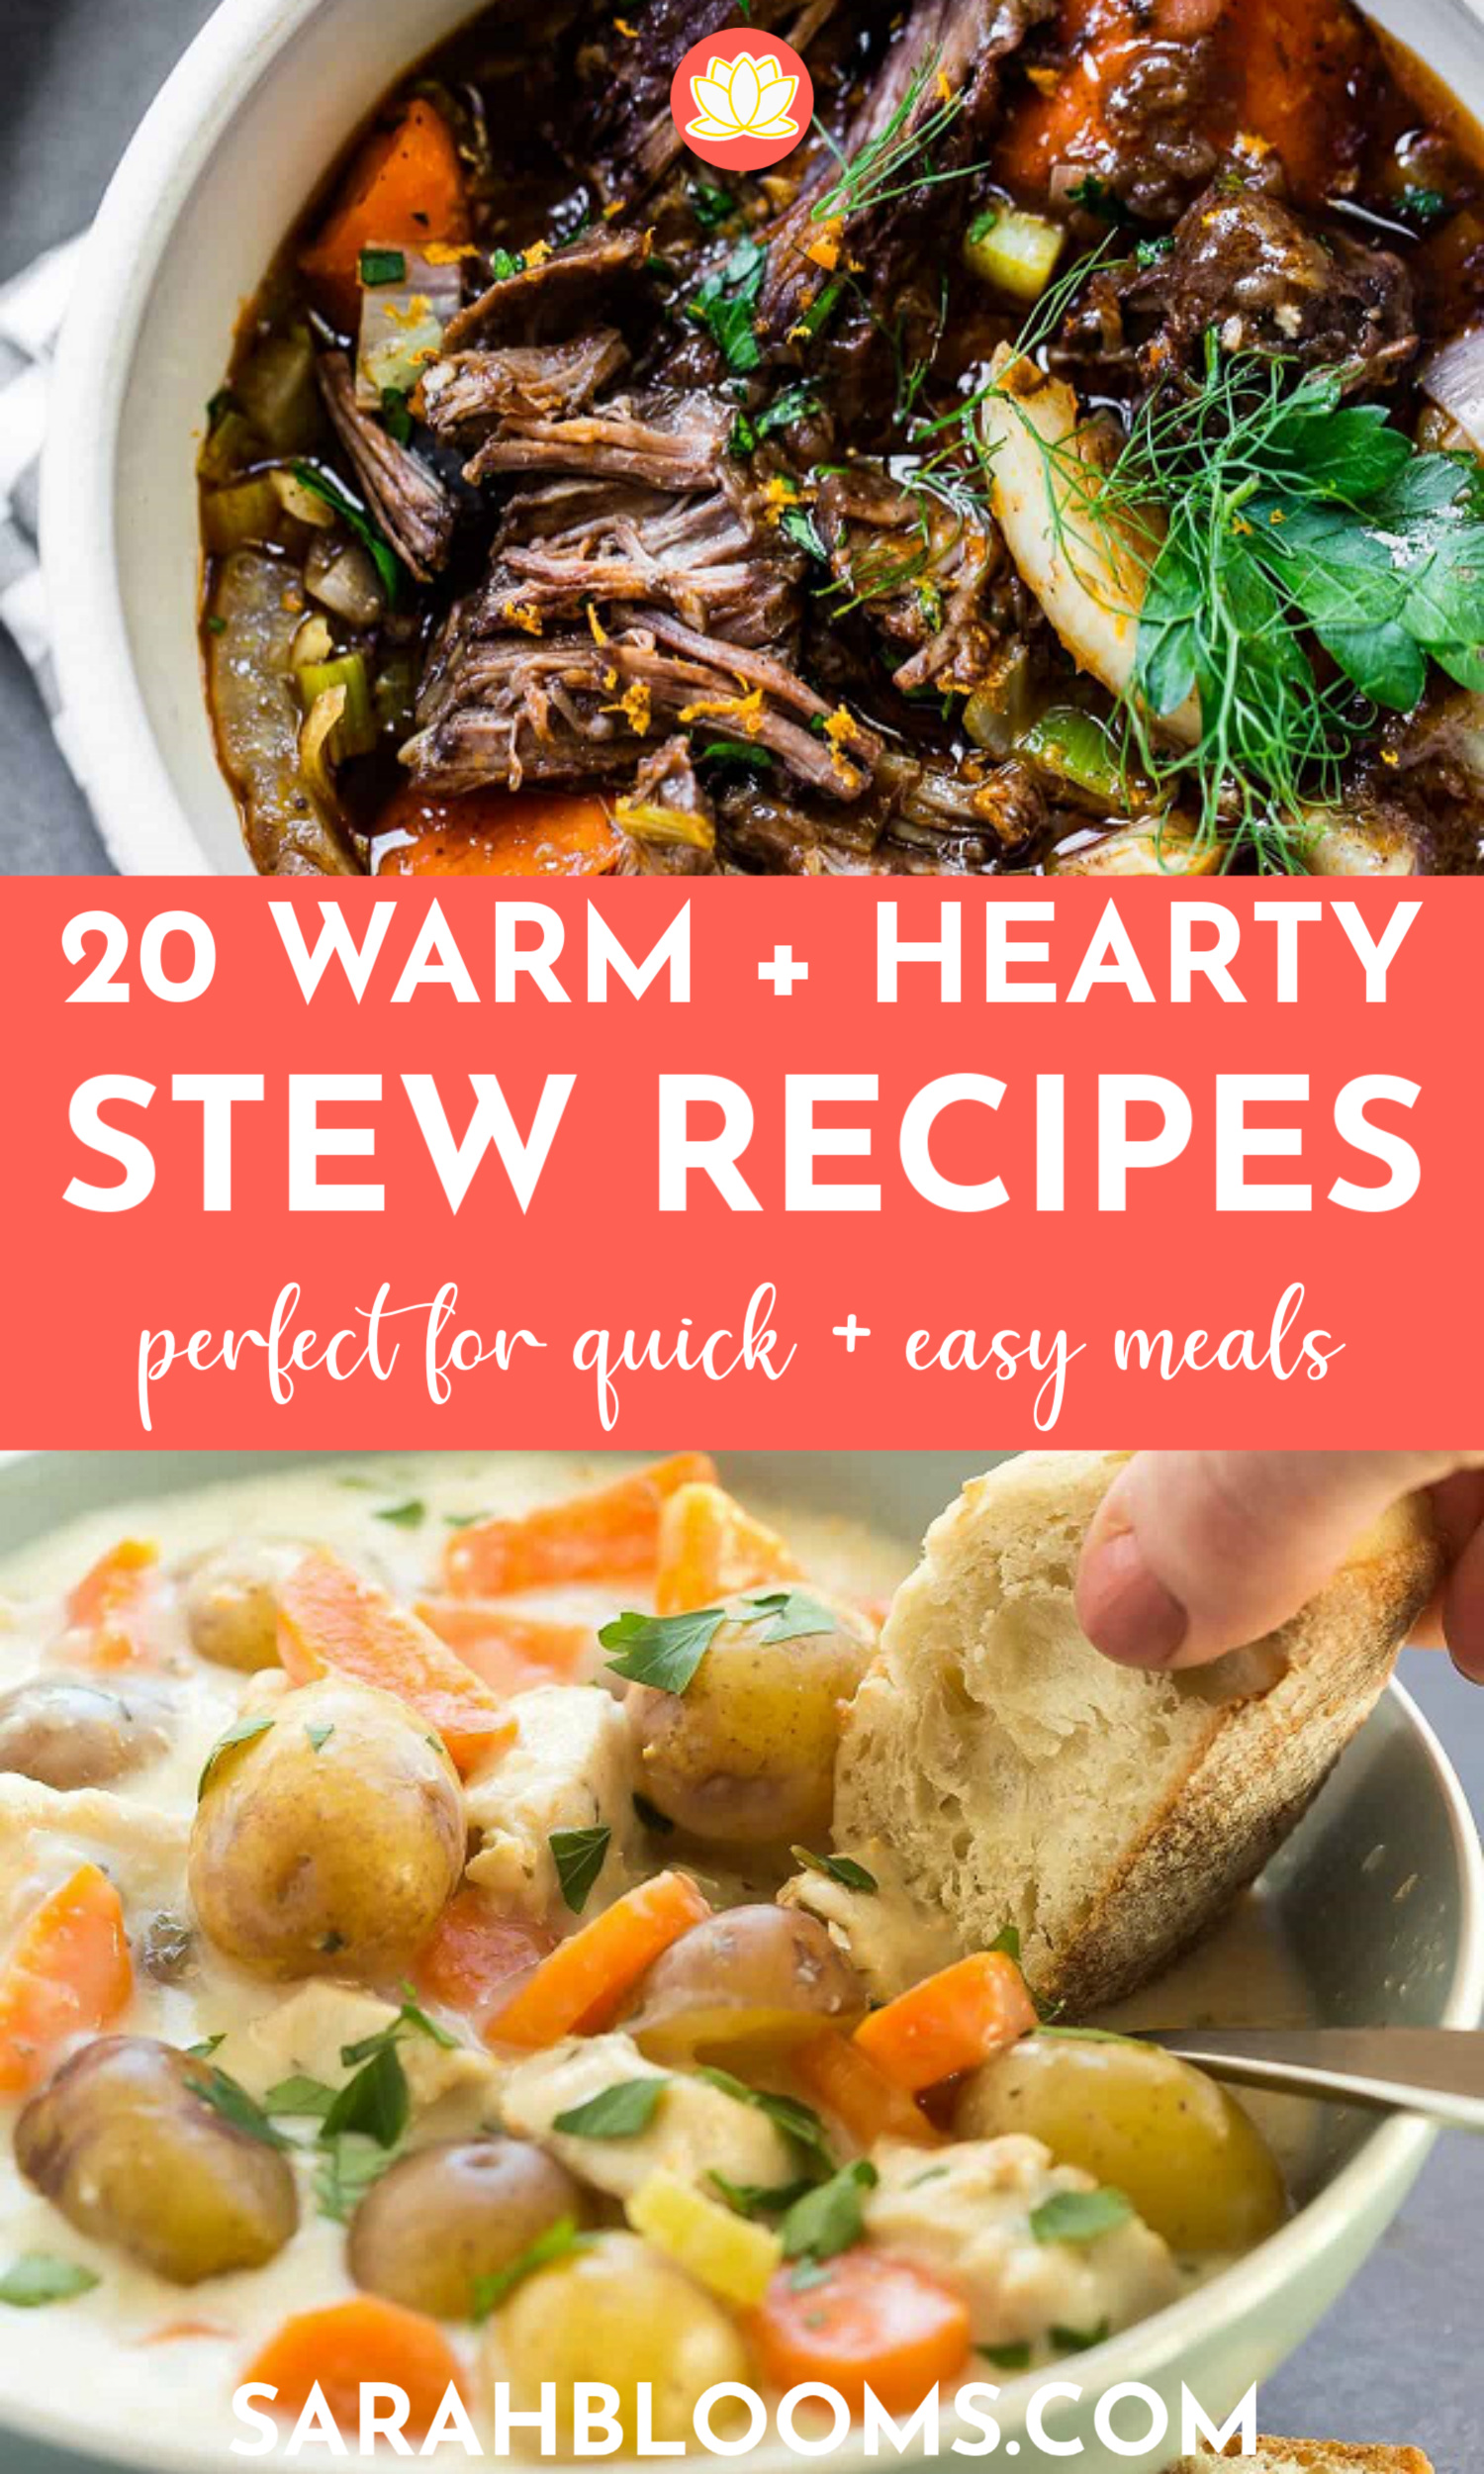 Enjoy these Quick and Easy Stew Recipes perfect for busy weeknights and lazy weekends! #stewrecipes #easydinnerrecipes #easydinnerideas #weeknightmeals #quickmeals #easymealideas